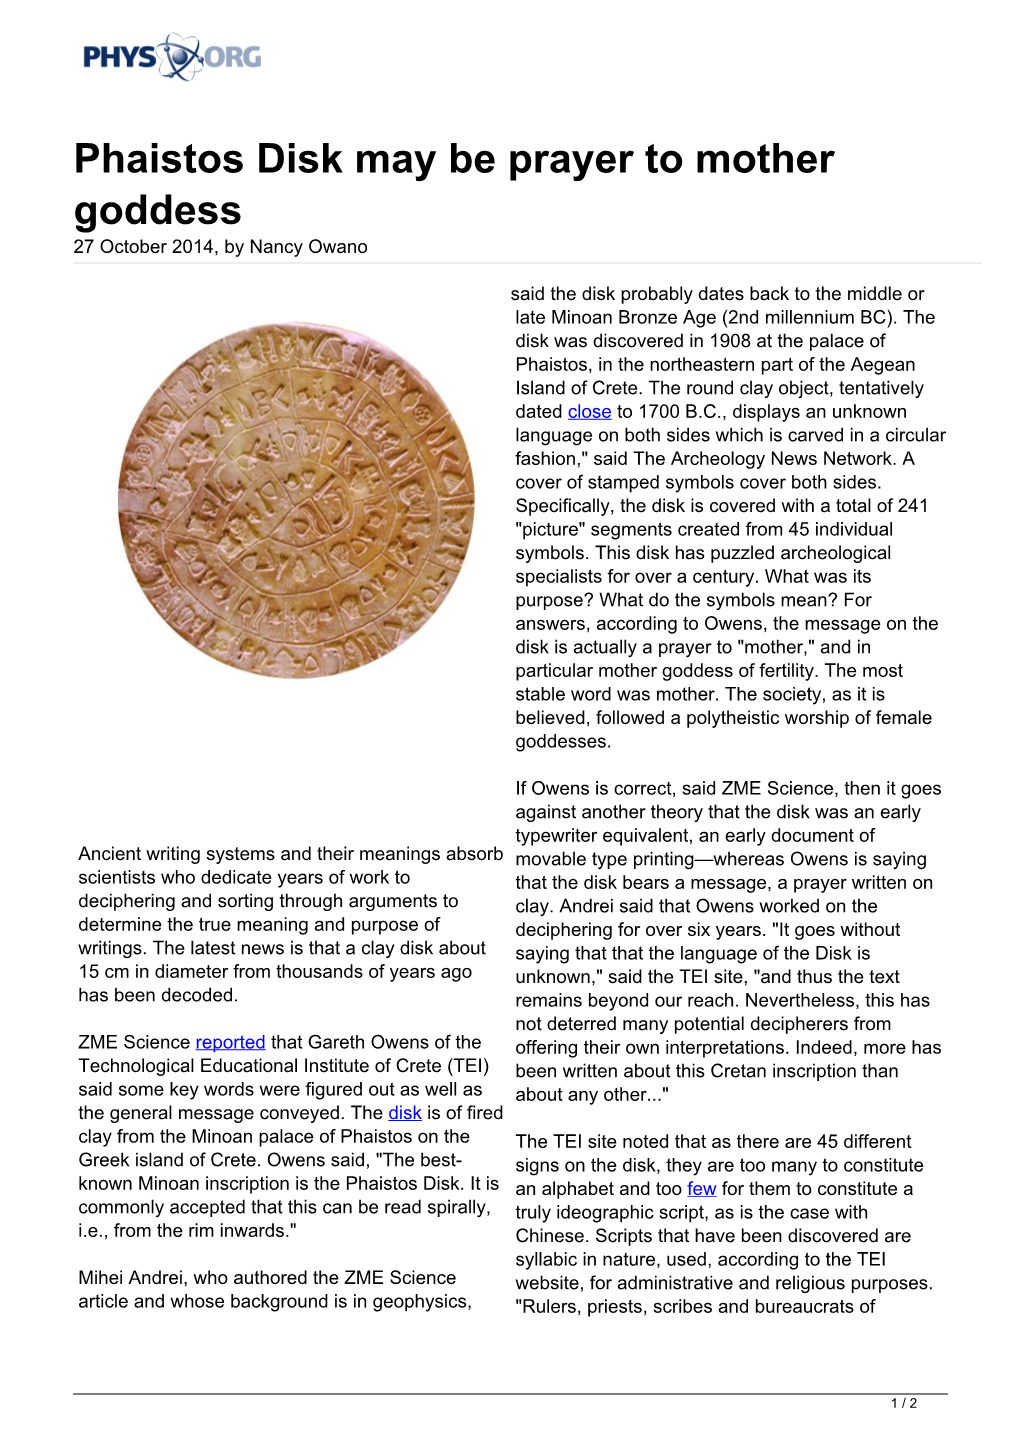 Phaistos Disk May Be Prayer to Mother Goddess 27 October 2014, by Nancy Owano